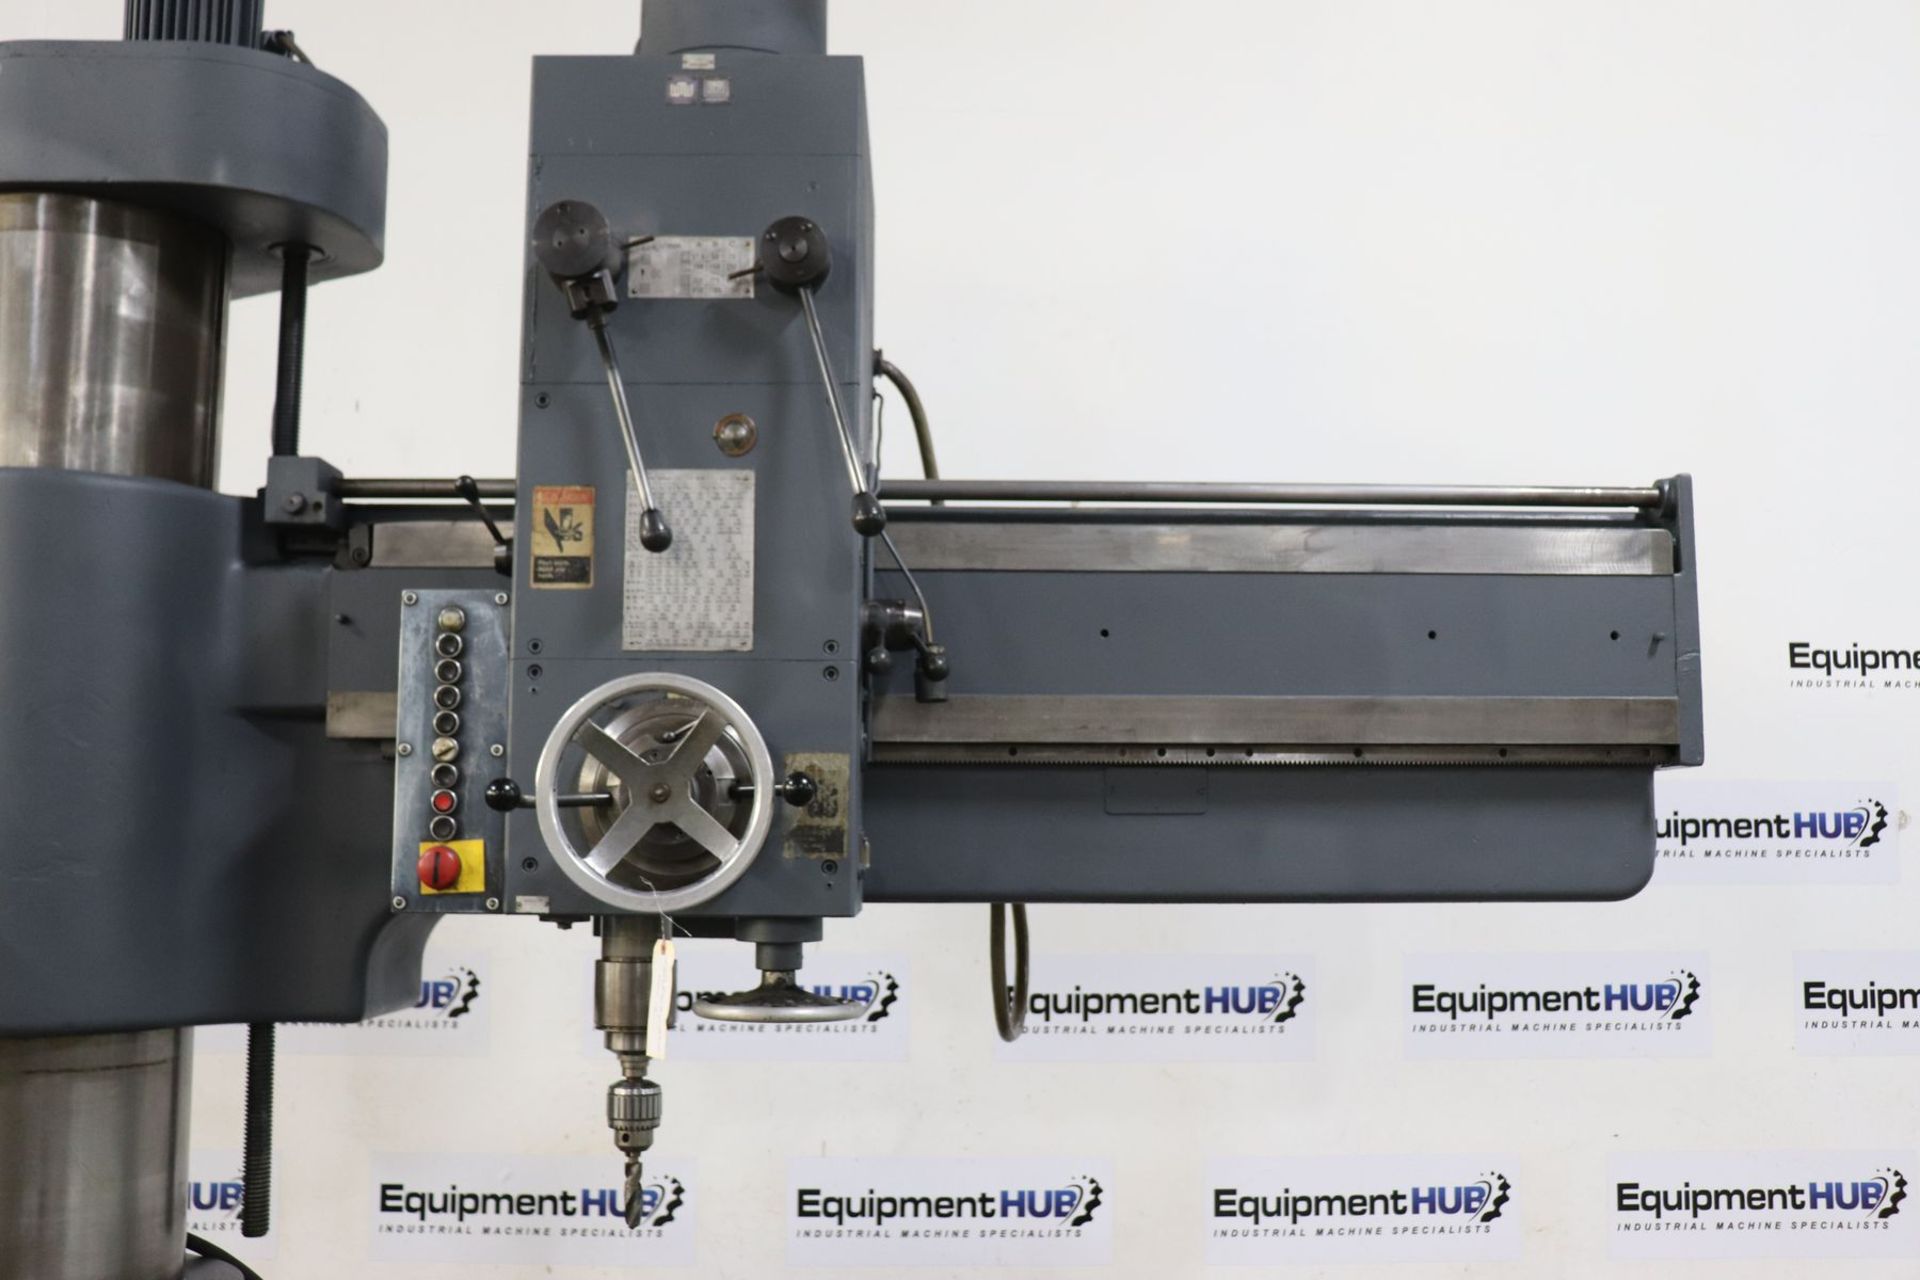 Heckert WMW BR 50 x 1600 5? x 13? Radial Arm Drilling & Tapping Machine - Image 6 of 13